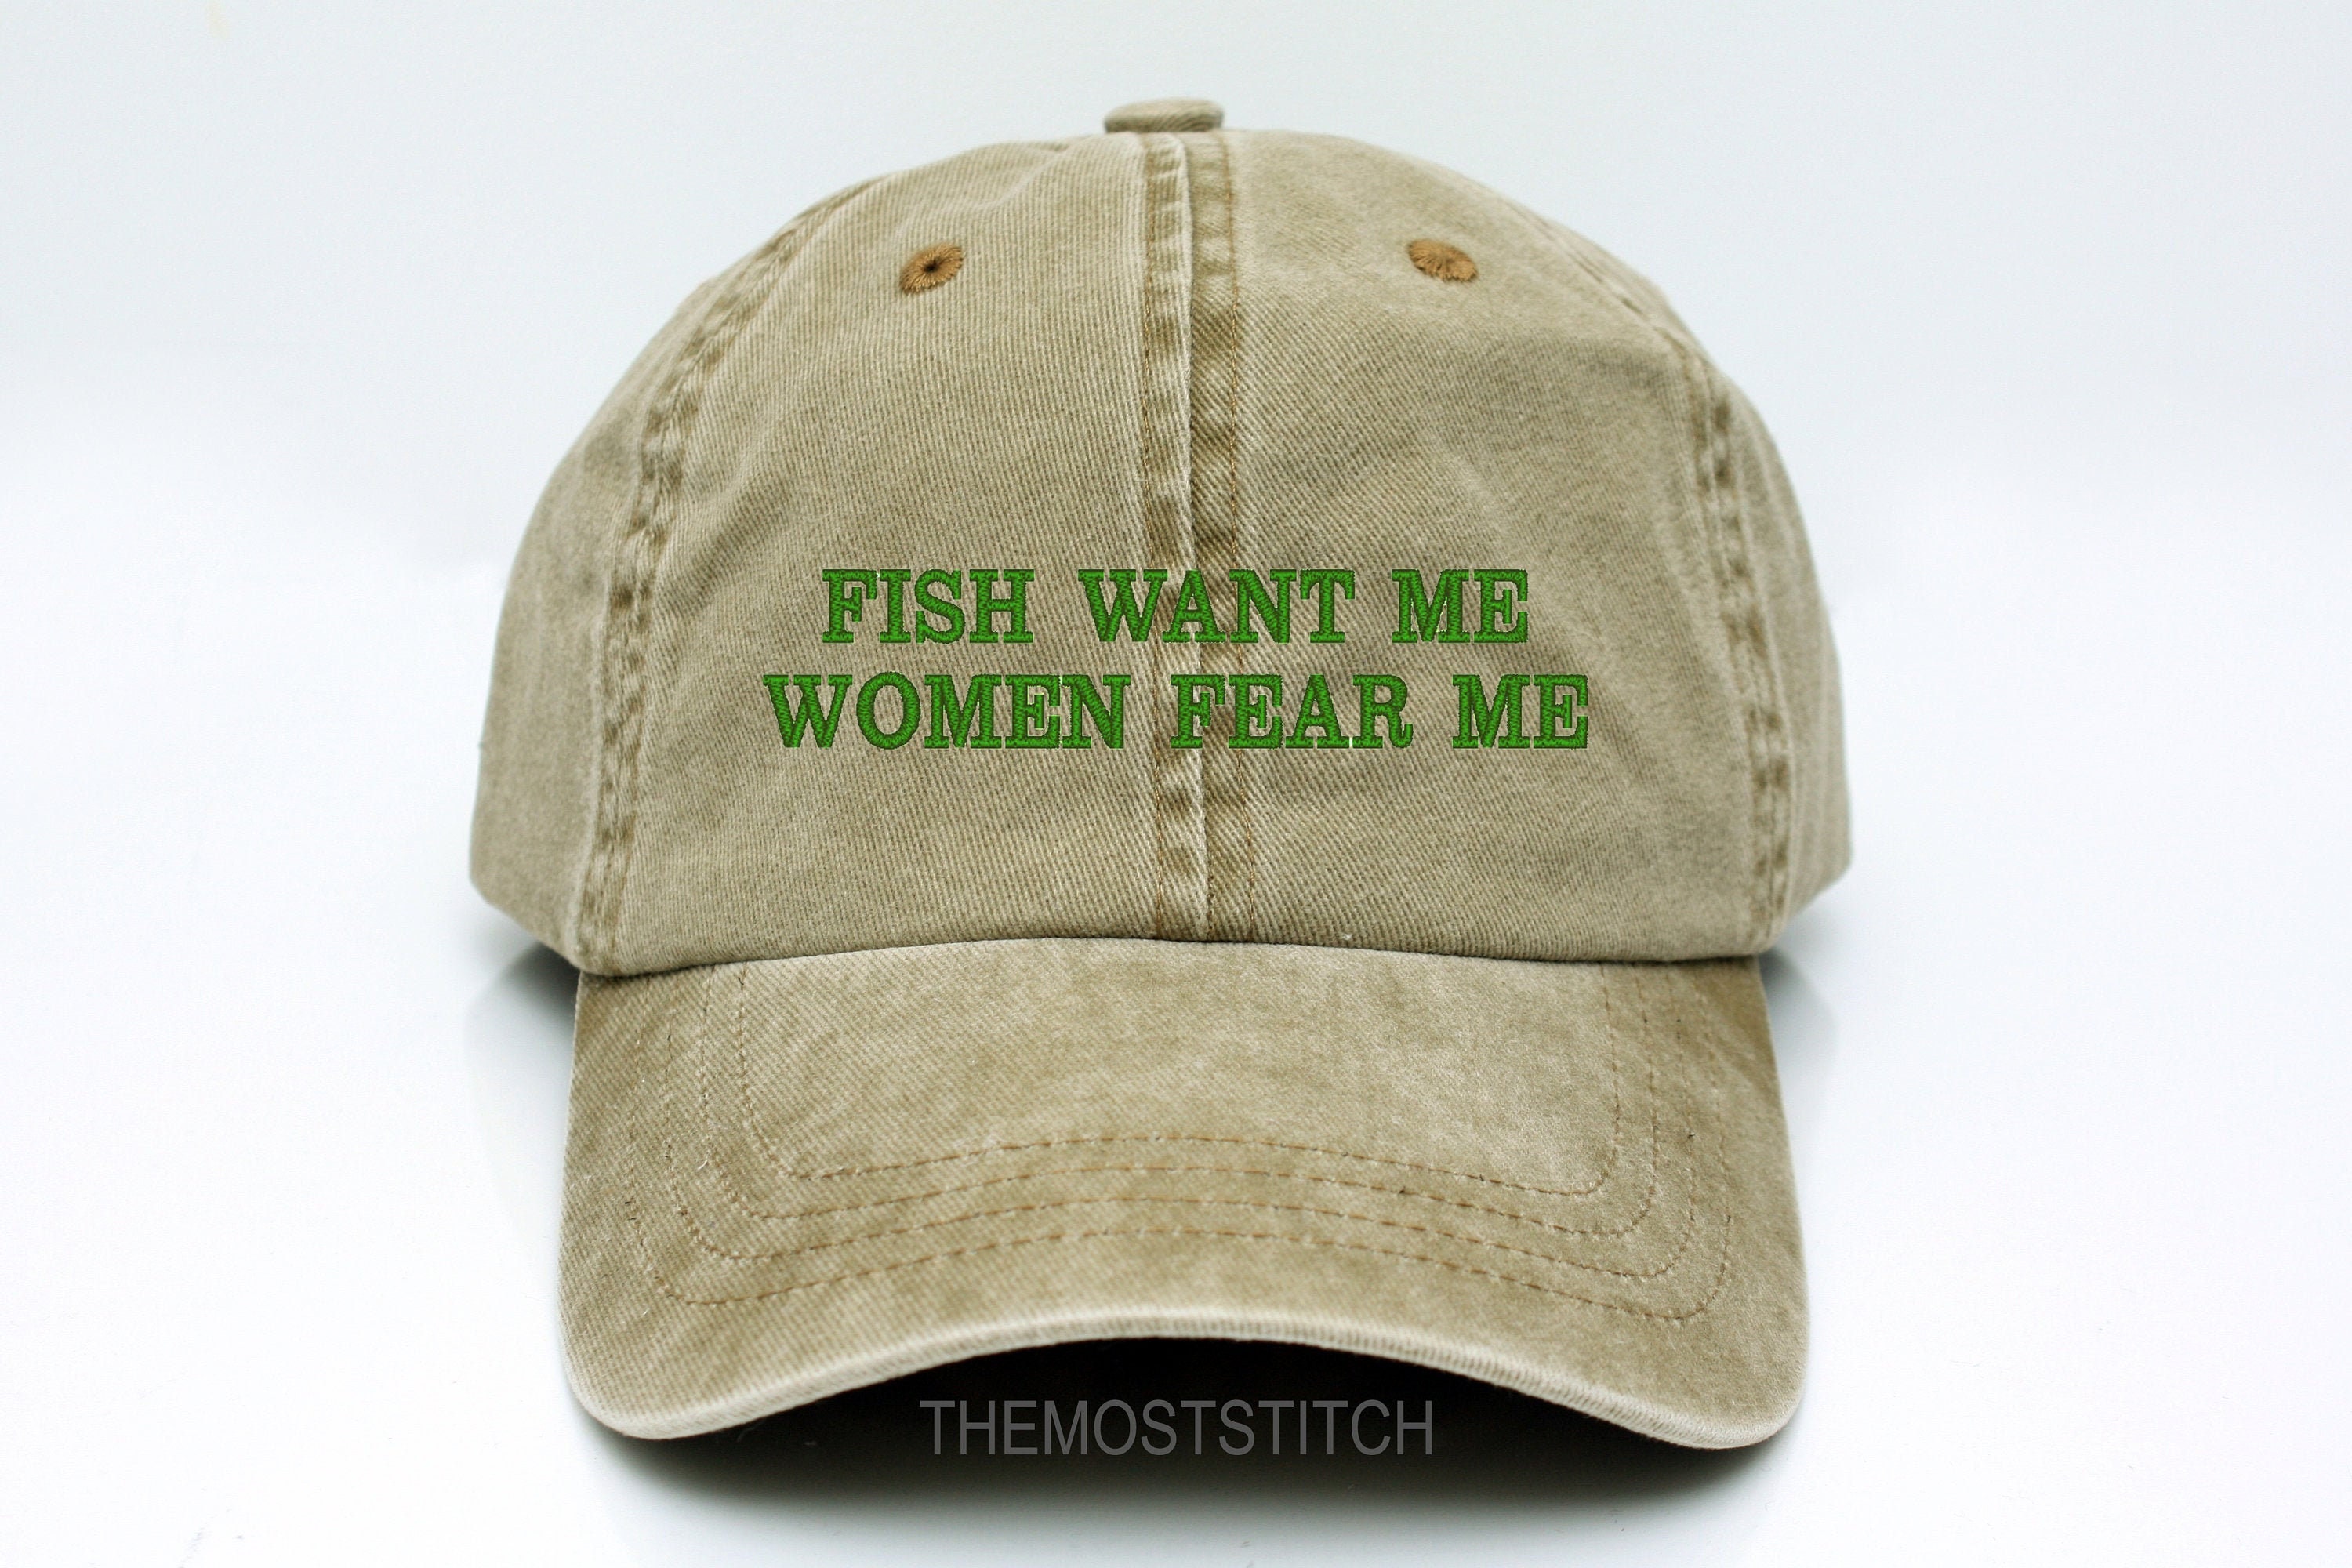 Fish want me Women fear me hat, Fishing hat, Fishing Lover Gift, Fish fear me hat, father's day, Dad hat, Custom hat, Embroidered